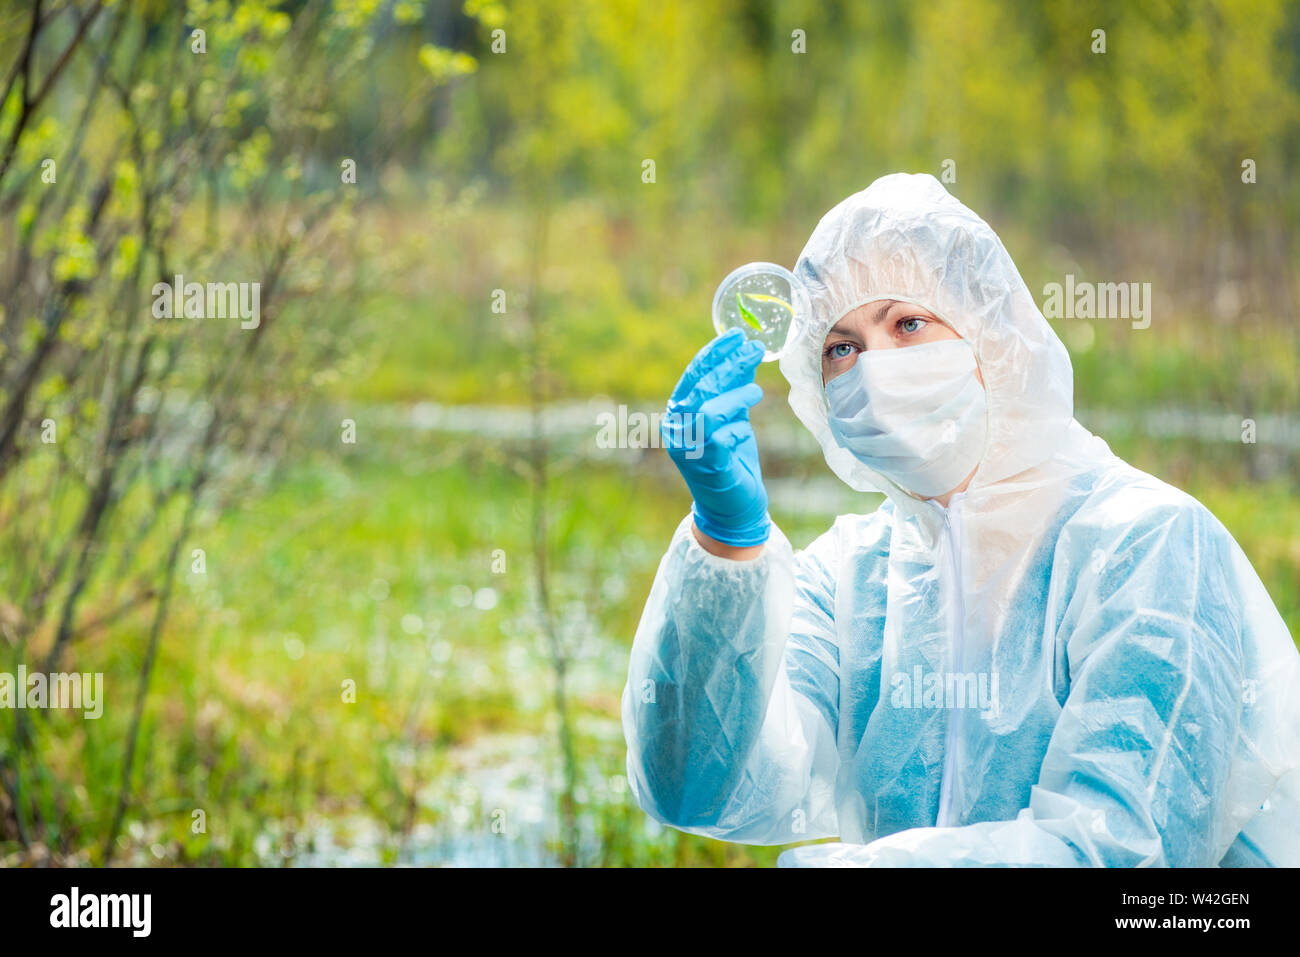 environmentalist in protective clothing examines infected plants from the forest lake Stock Photo